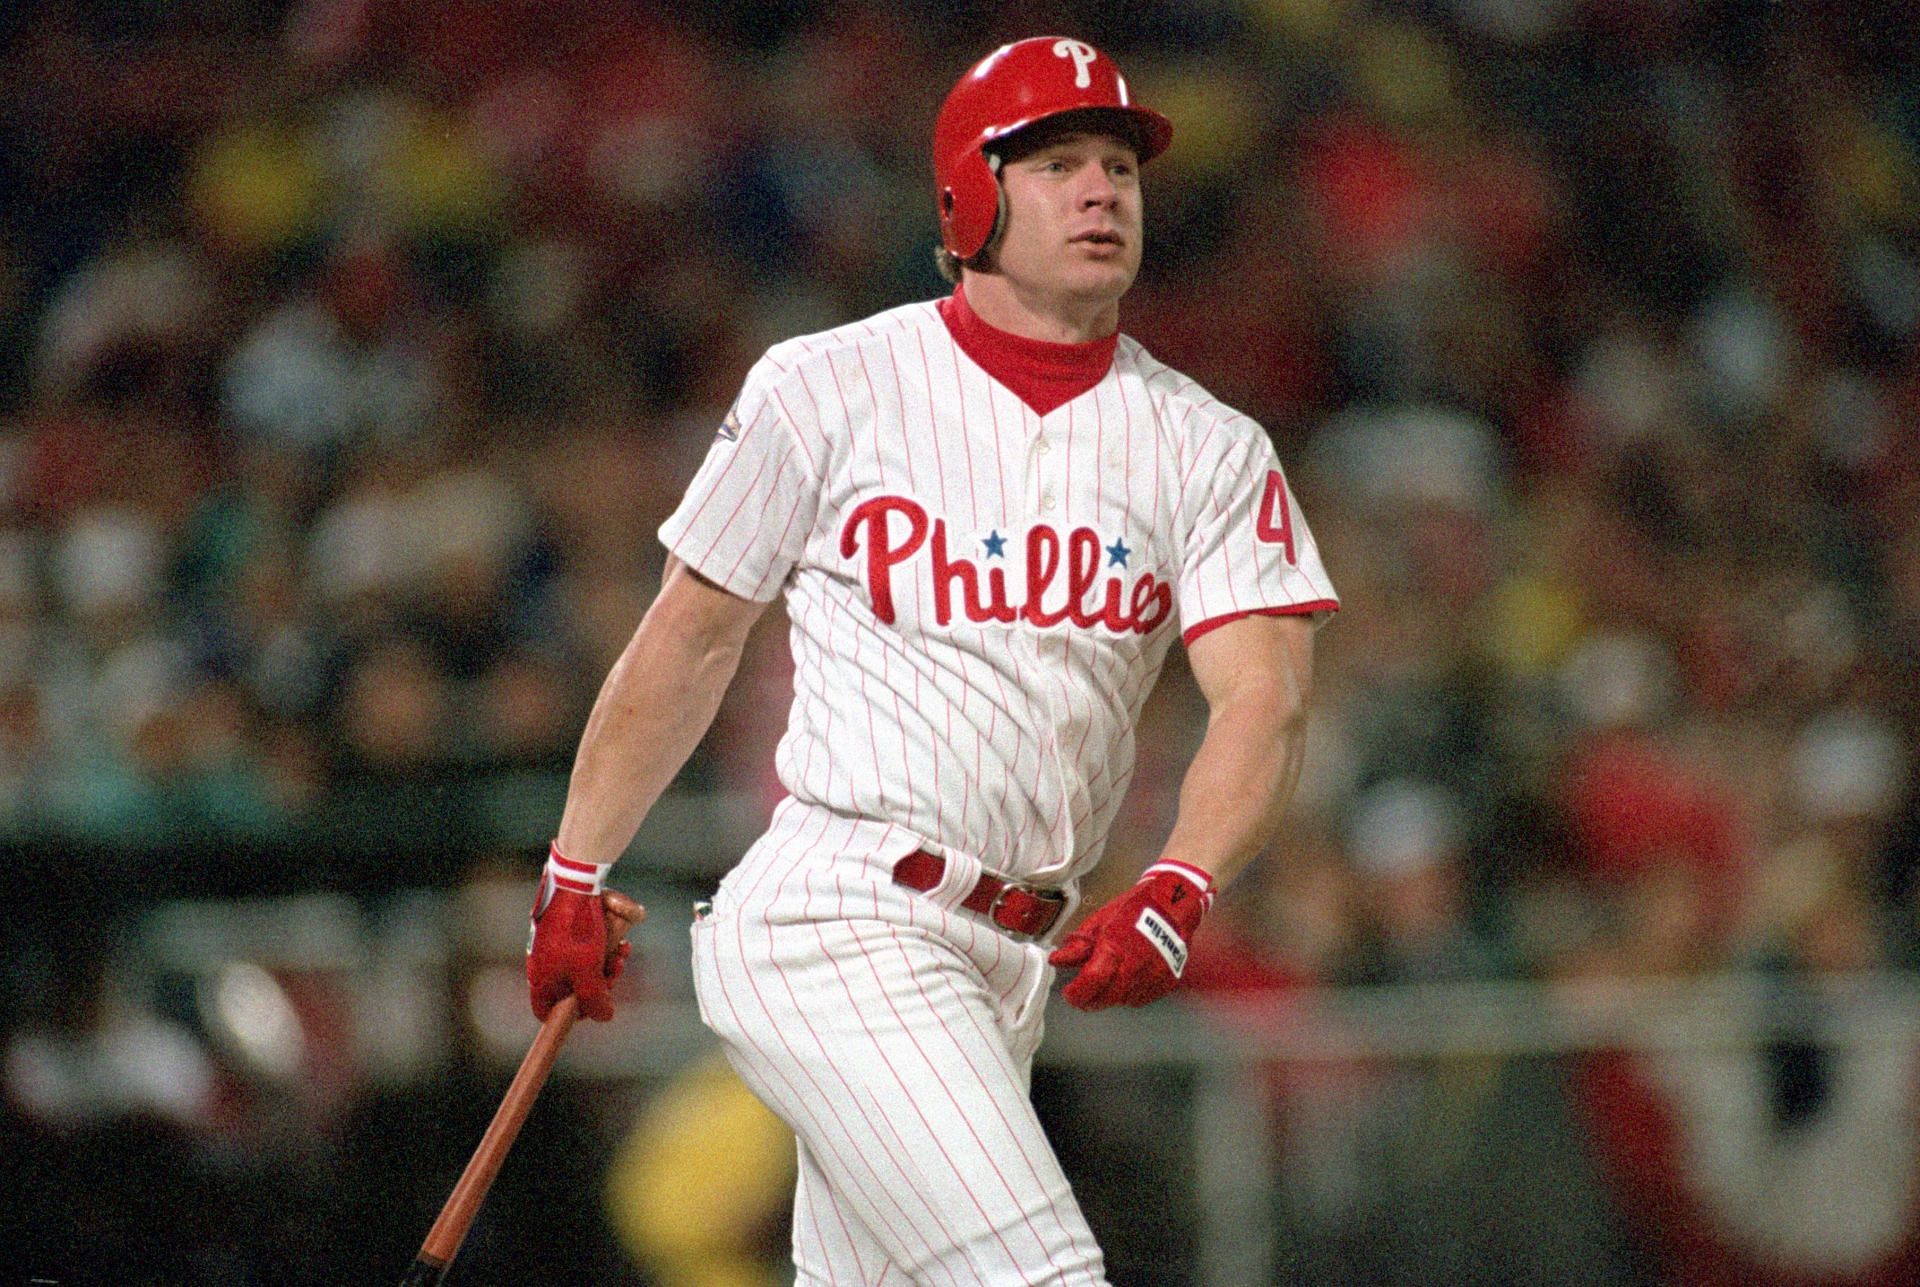 Lenny Dykstra throws shade at Phillies while applauding 12-1 Philadelphia  Eagles on making the postseason convincingly